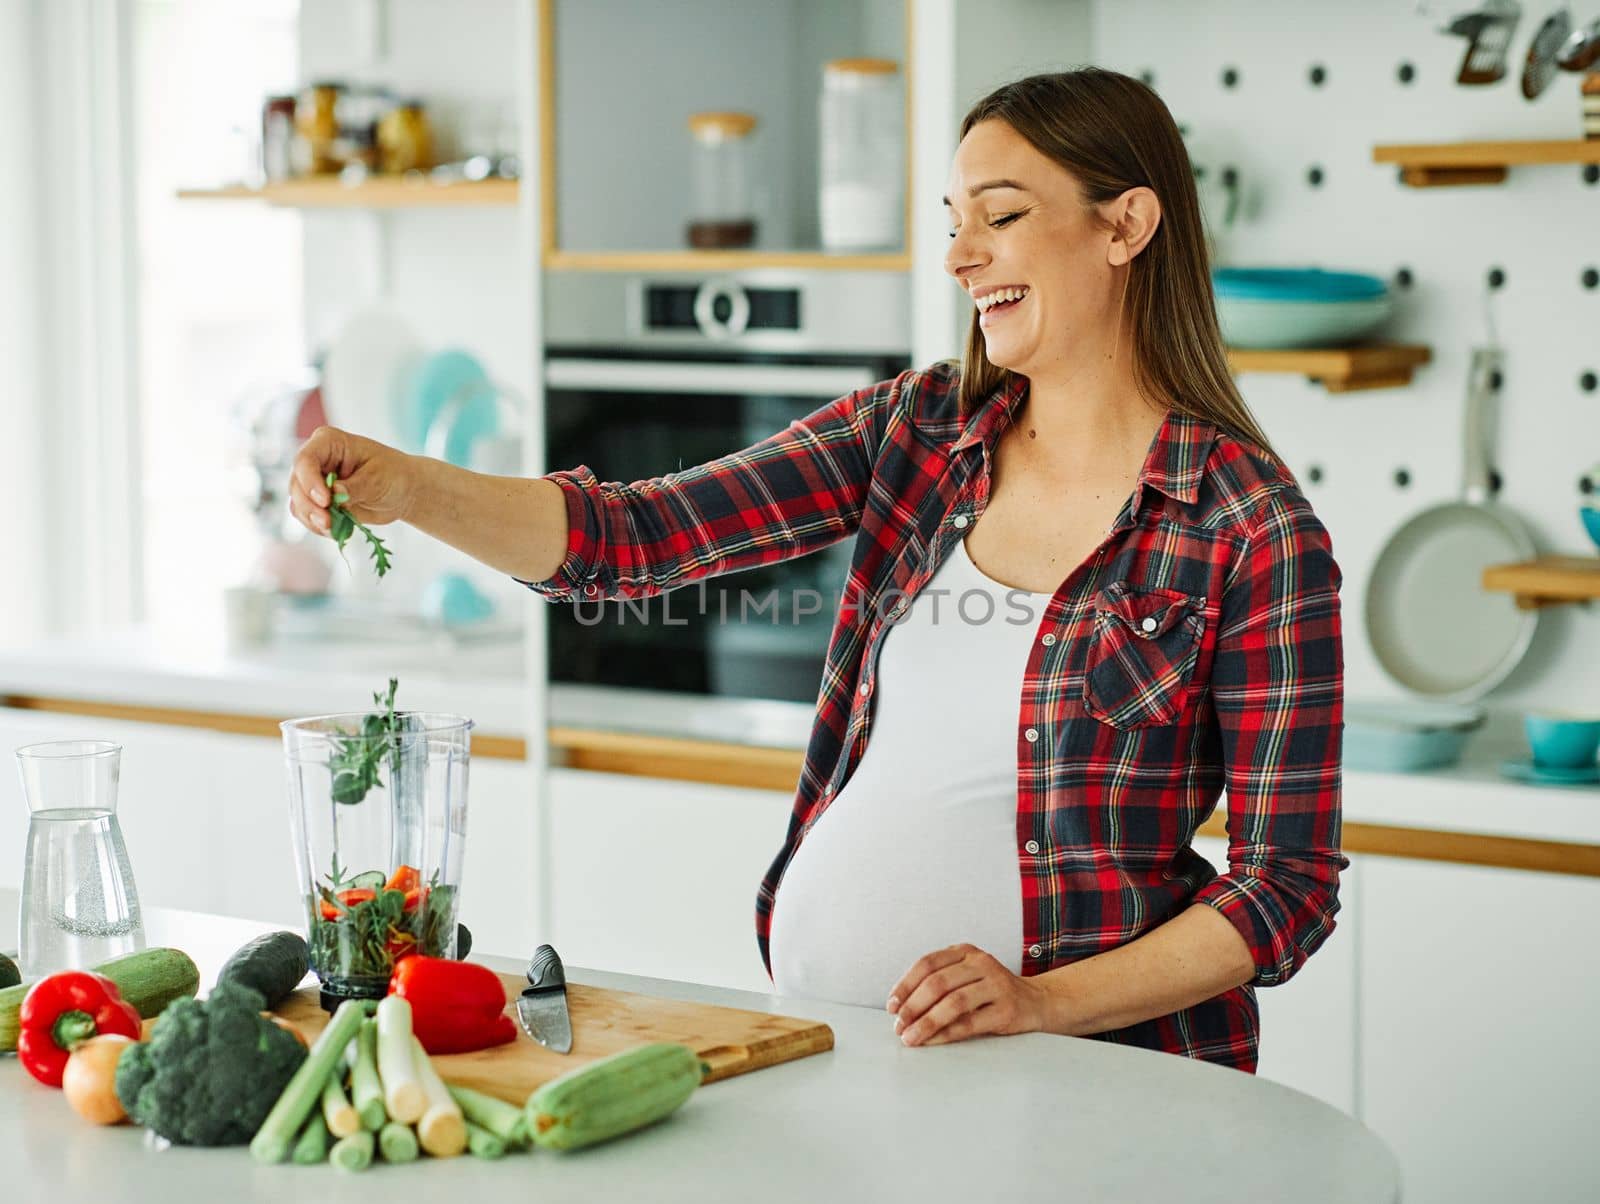 woman pregnant food healthy female vegetable pregnancy mother preparing eating home young salad happy maternity health kitchen diet green smoothy by Picsfive